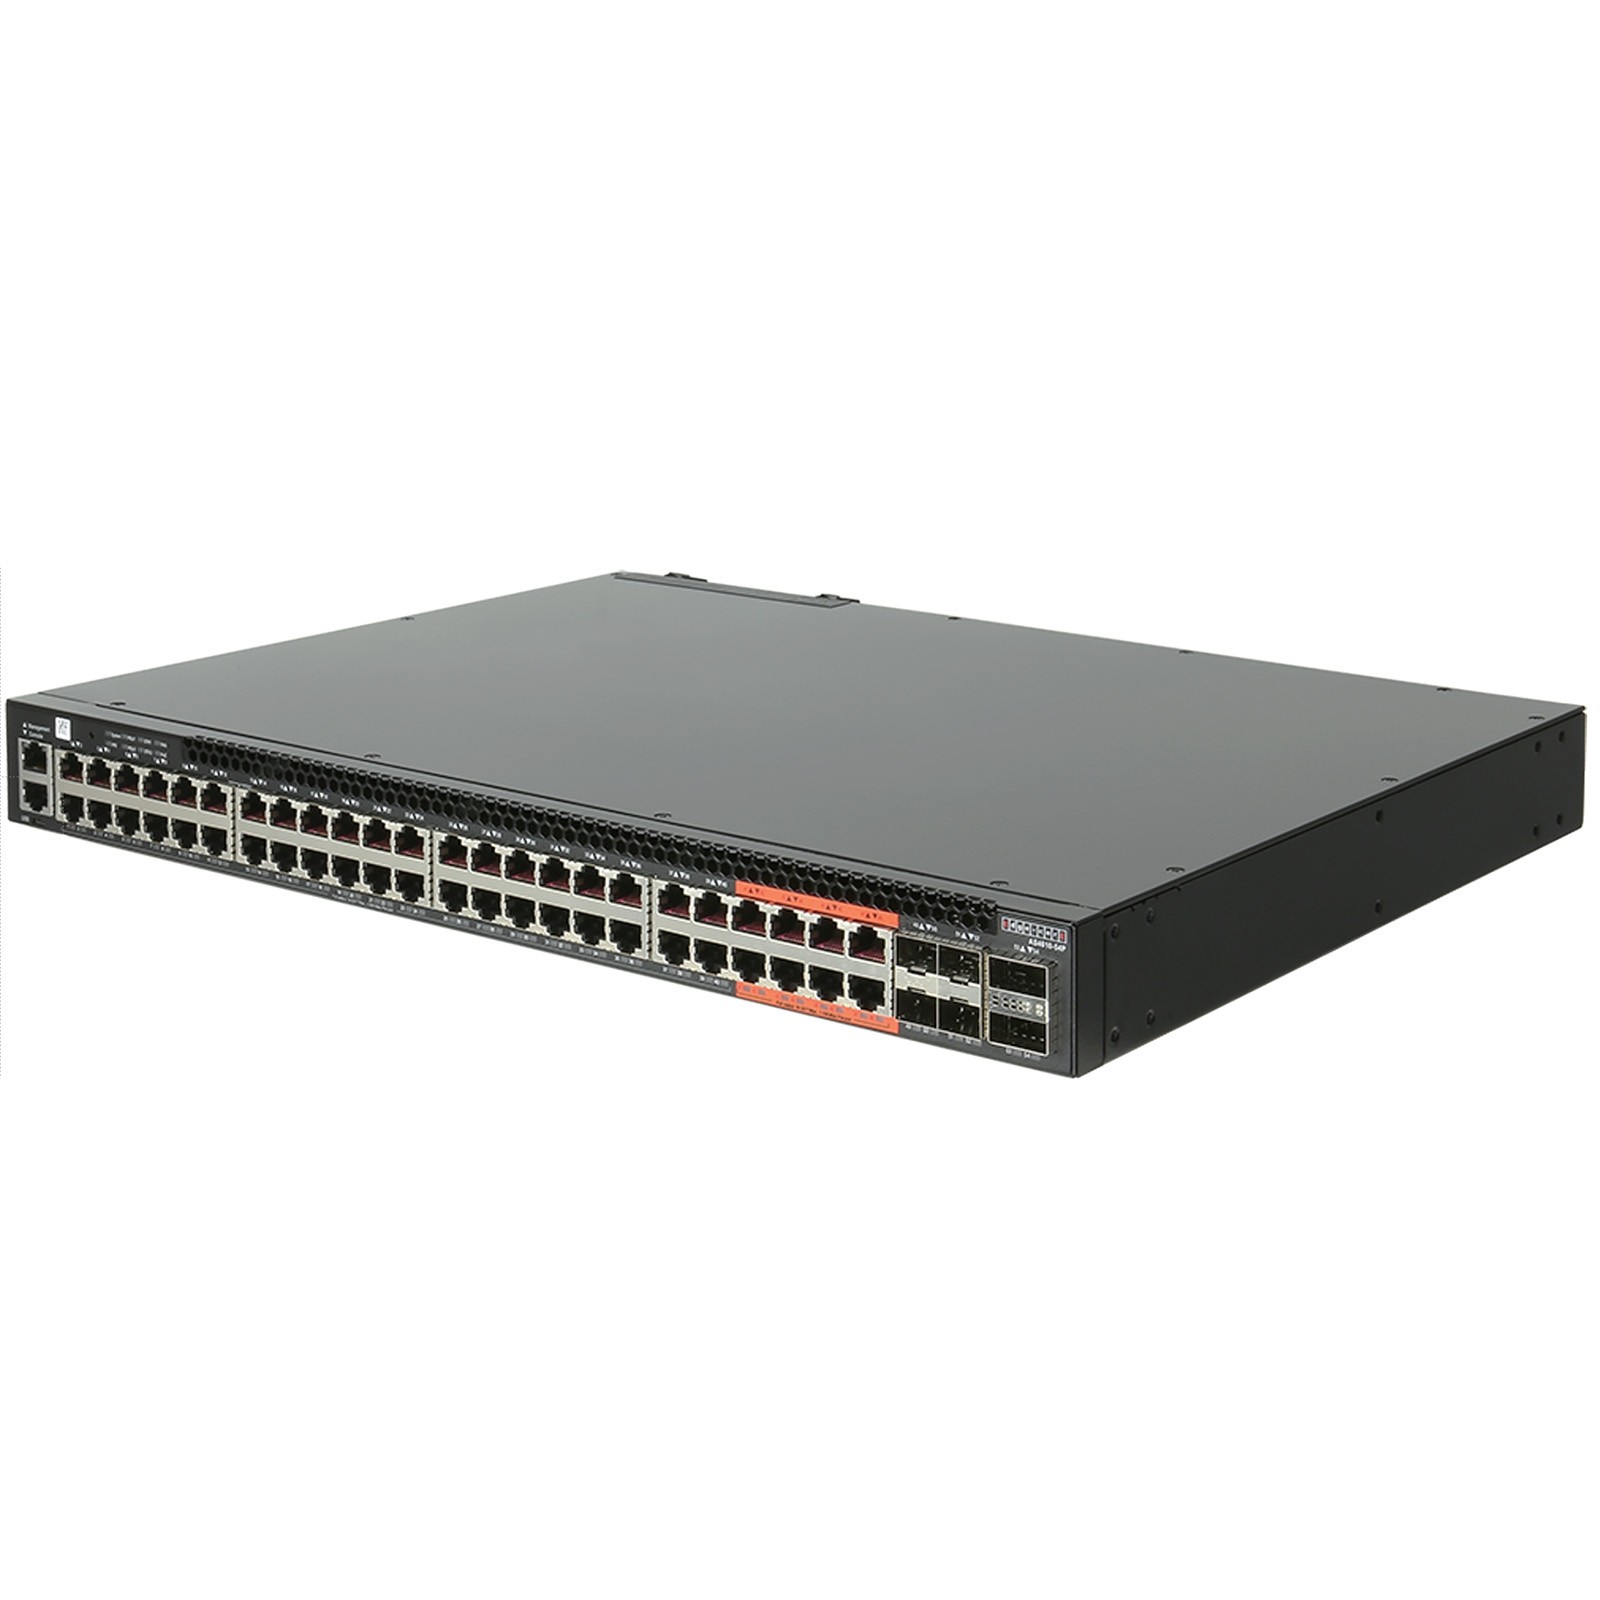 Edge-Core AS4610-54P 48x 1G RJ-45 Fully Managed Switch